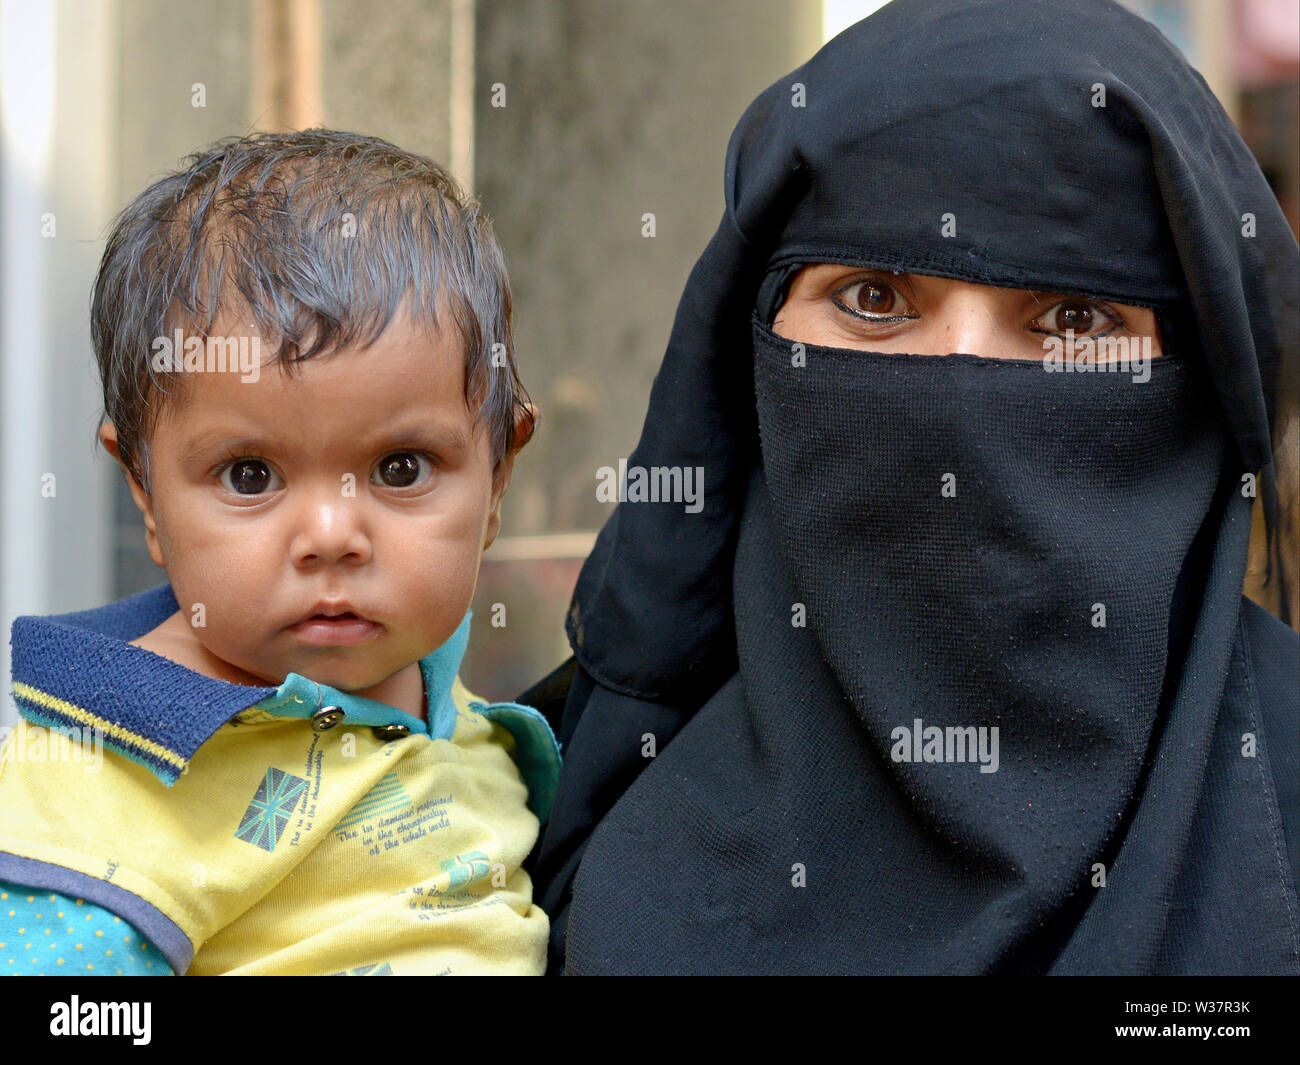 Indian Muslim woman with romantic eyes and eye makeup wears a black niqab and burqa and carries her toddler son in her arms. Stock Photo